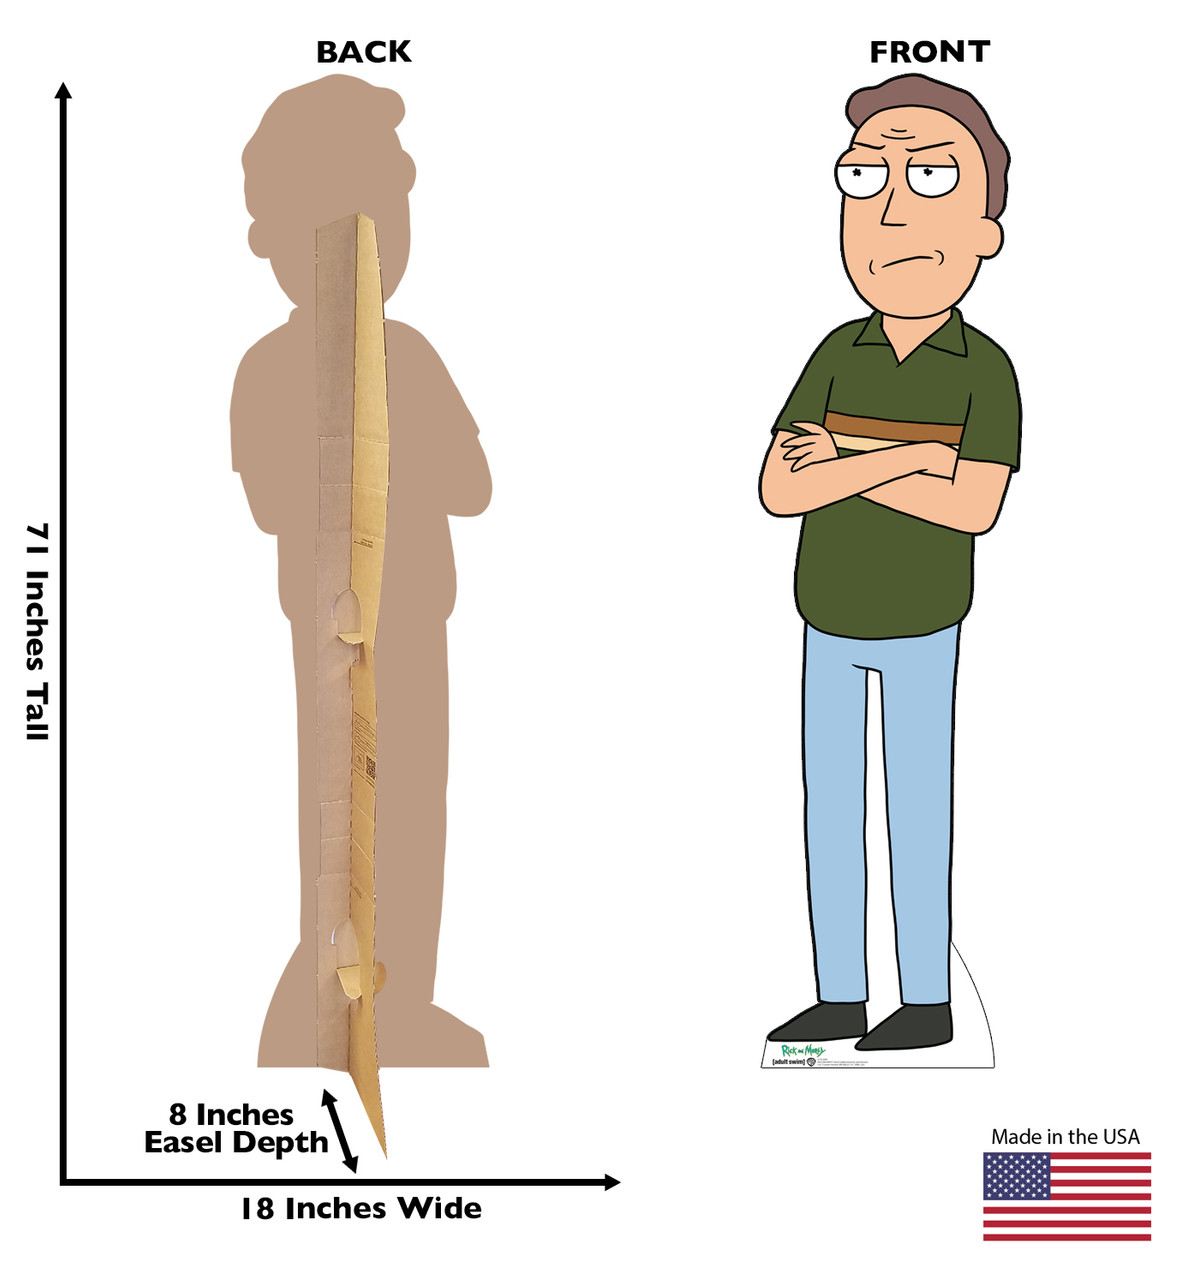 Life-size cardboard standee of Jerry from the Rick and Morty TV series with back and front dimensions.